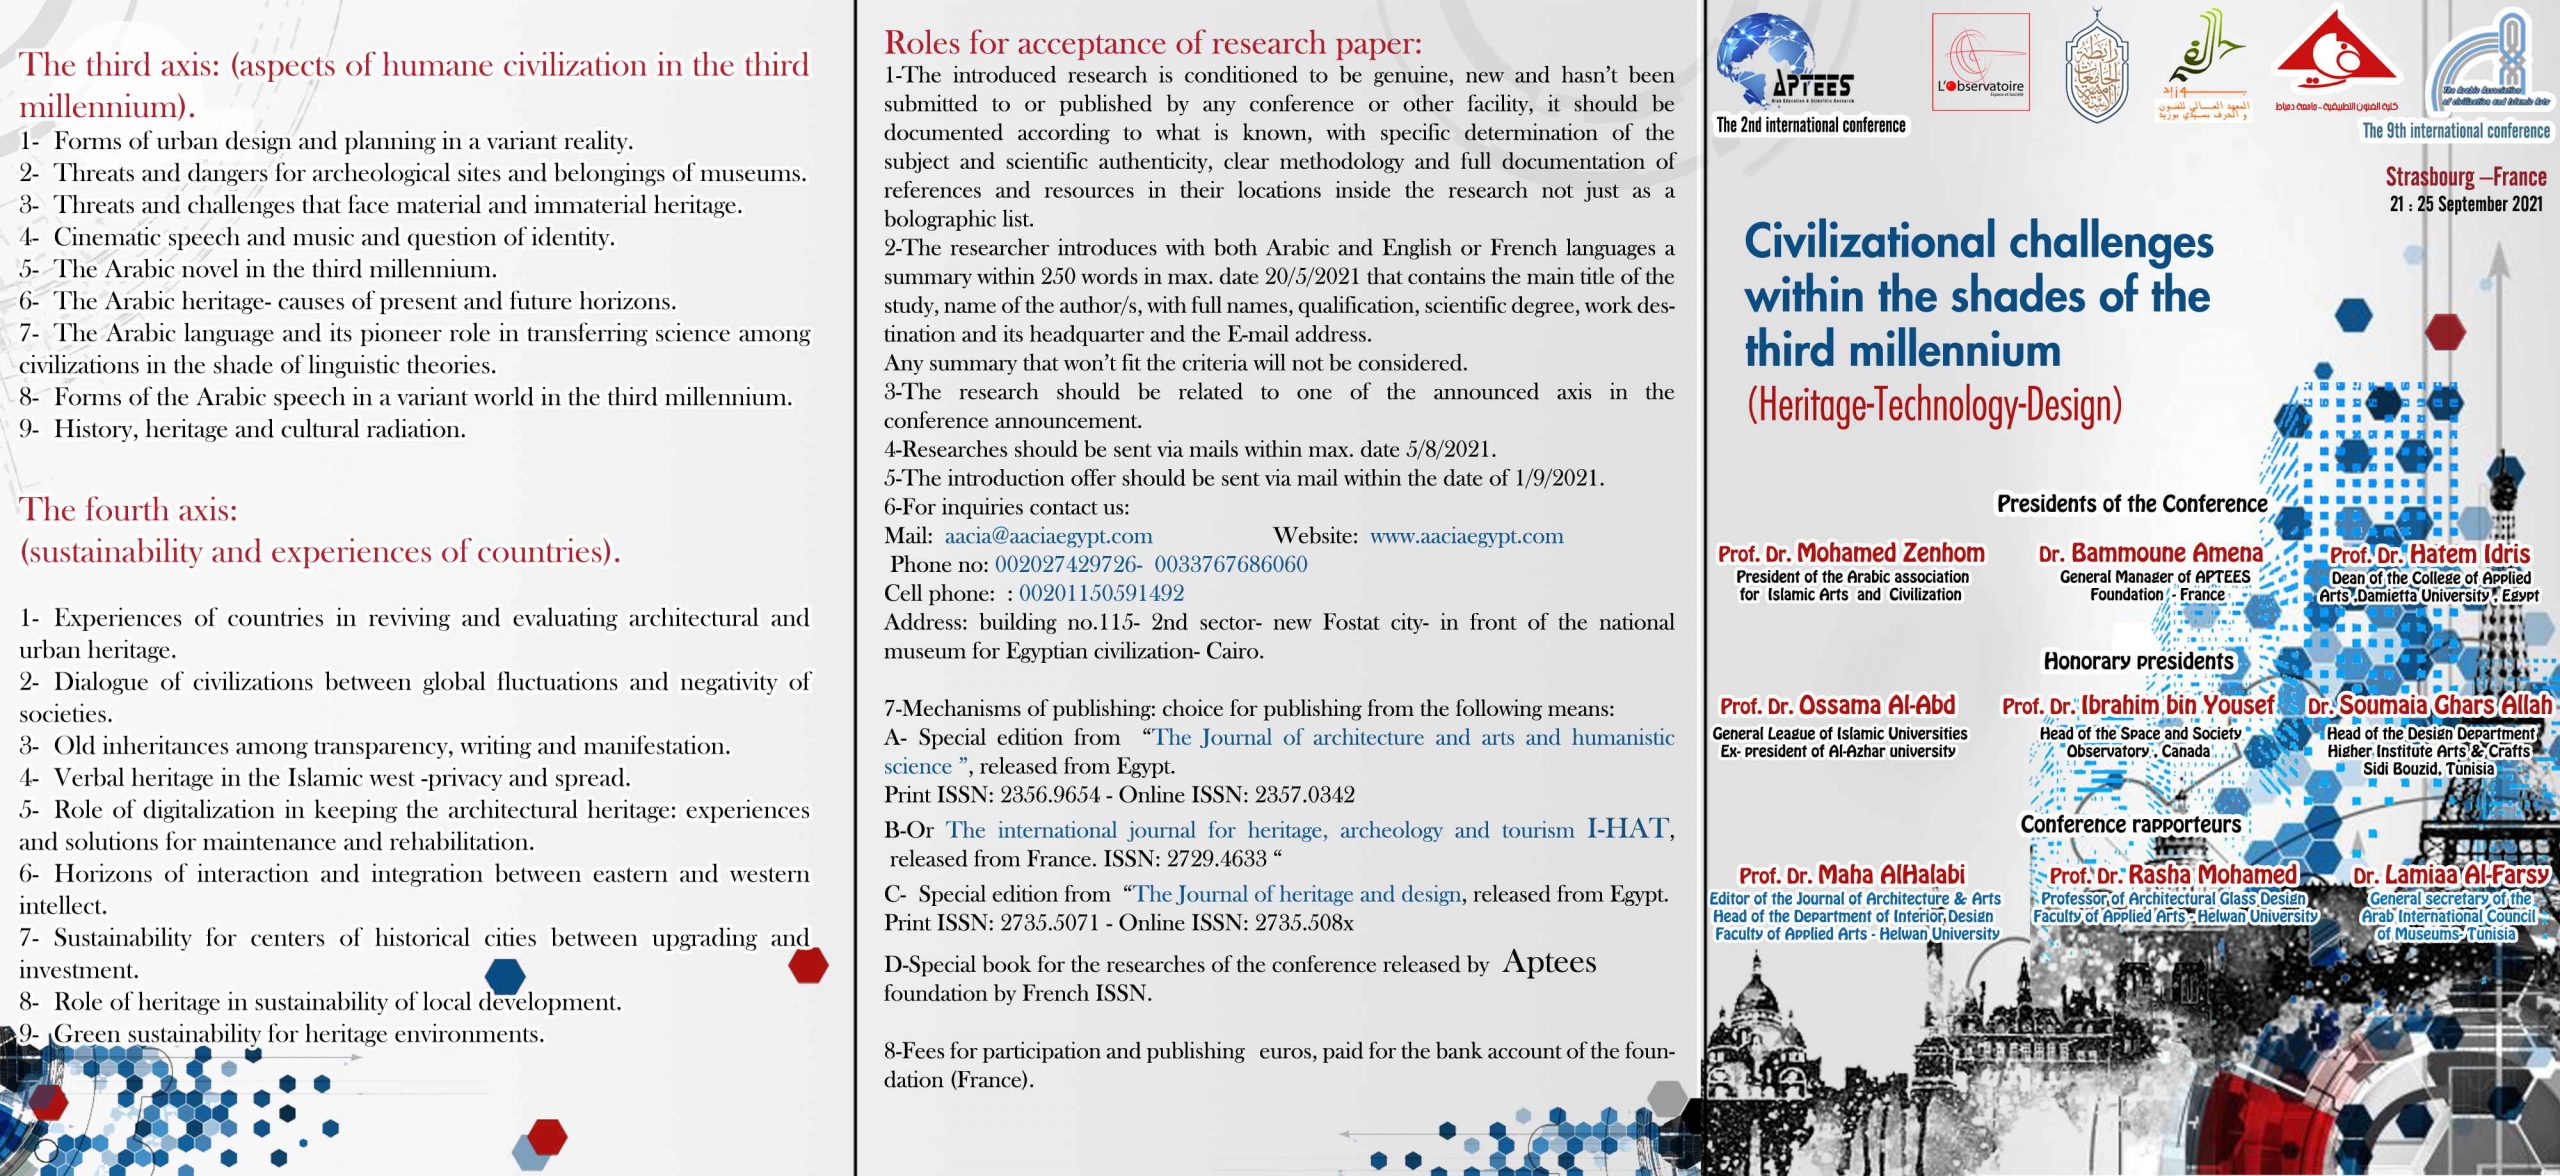 The 9th international conference “Civilizational challenges within the shades of the third millennium”  (Heritage-Technology-Design)